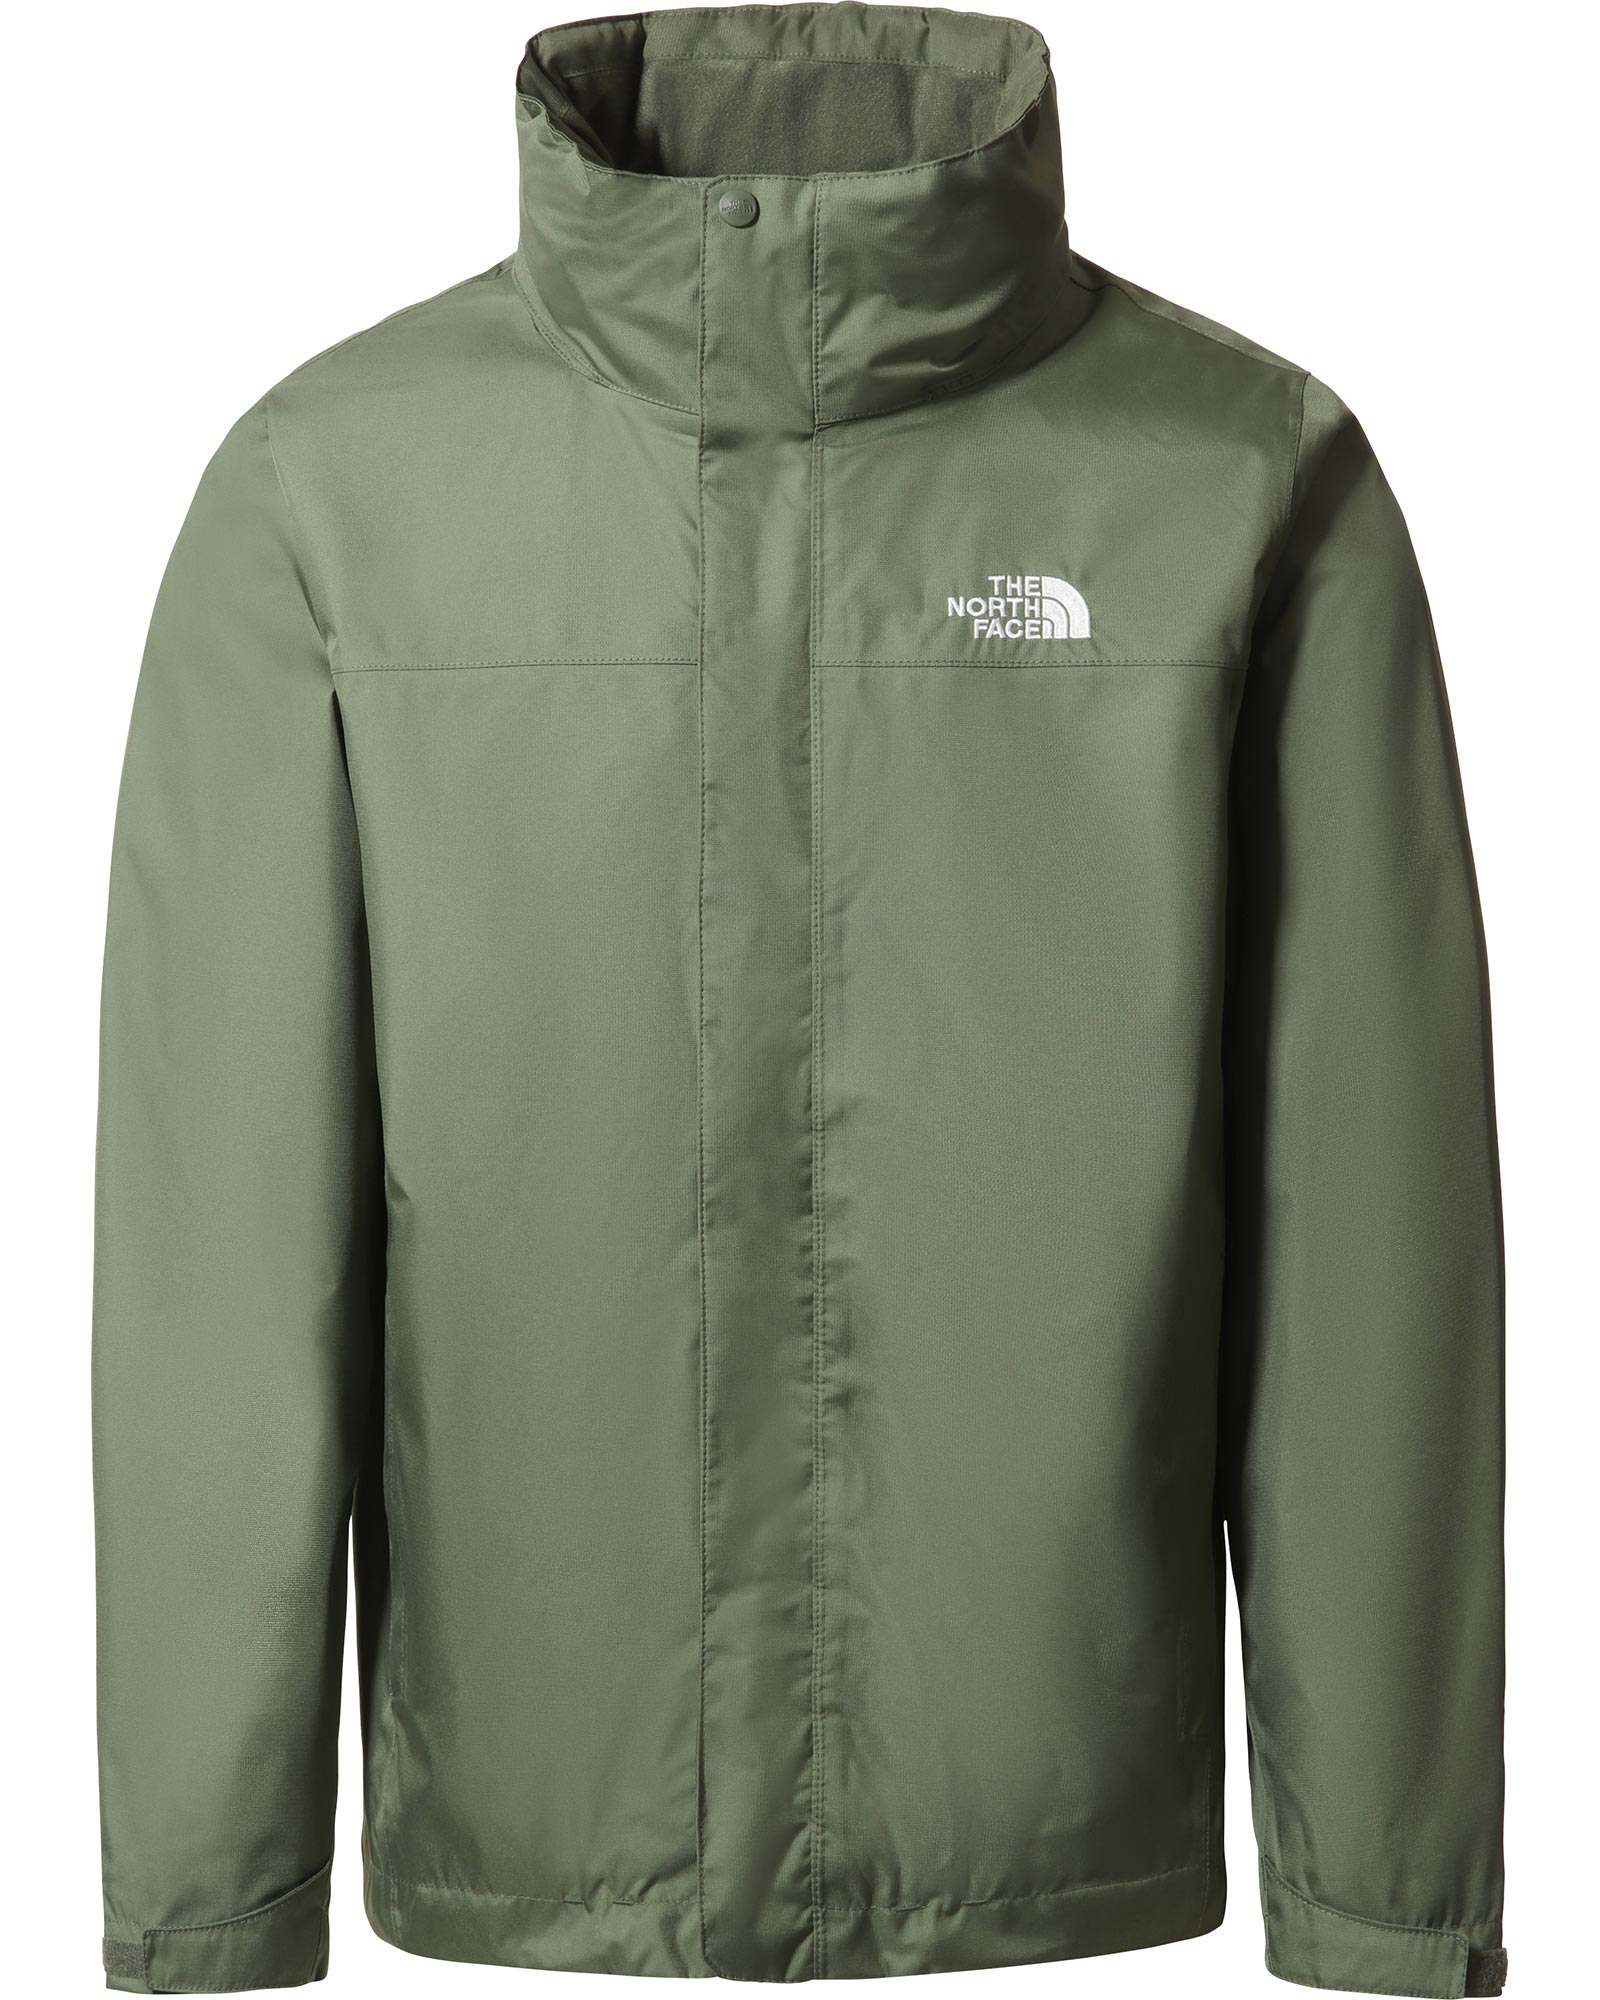 The North Face Evolve Triclimate Men’s Jacket - Thyme Green XS